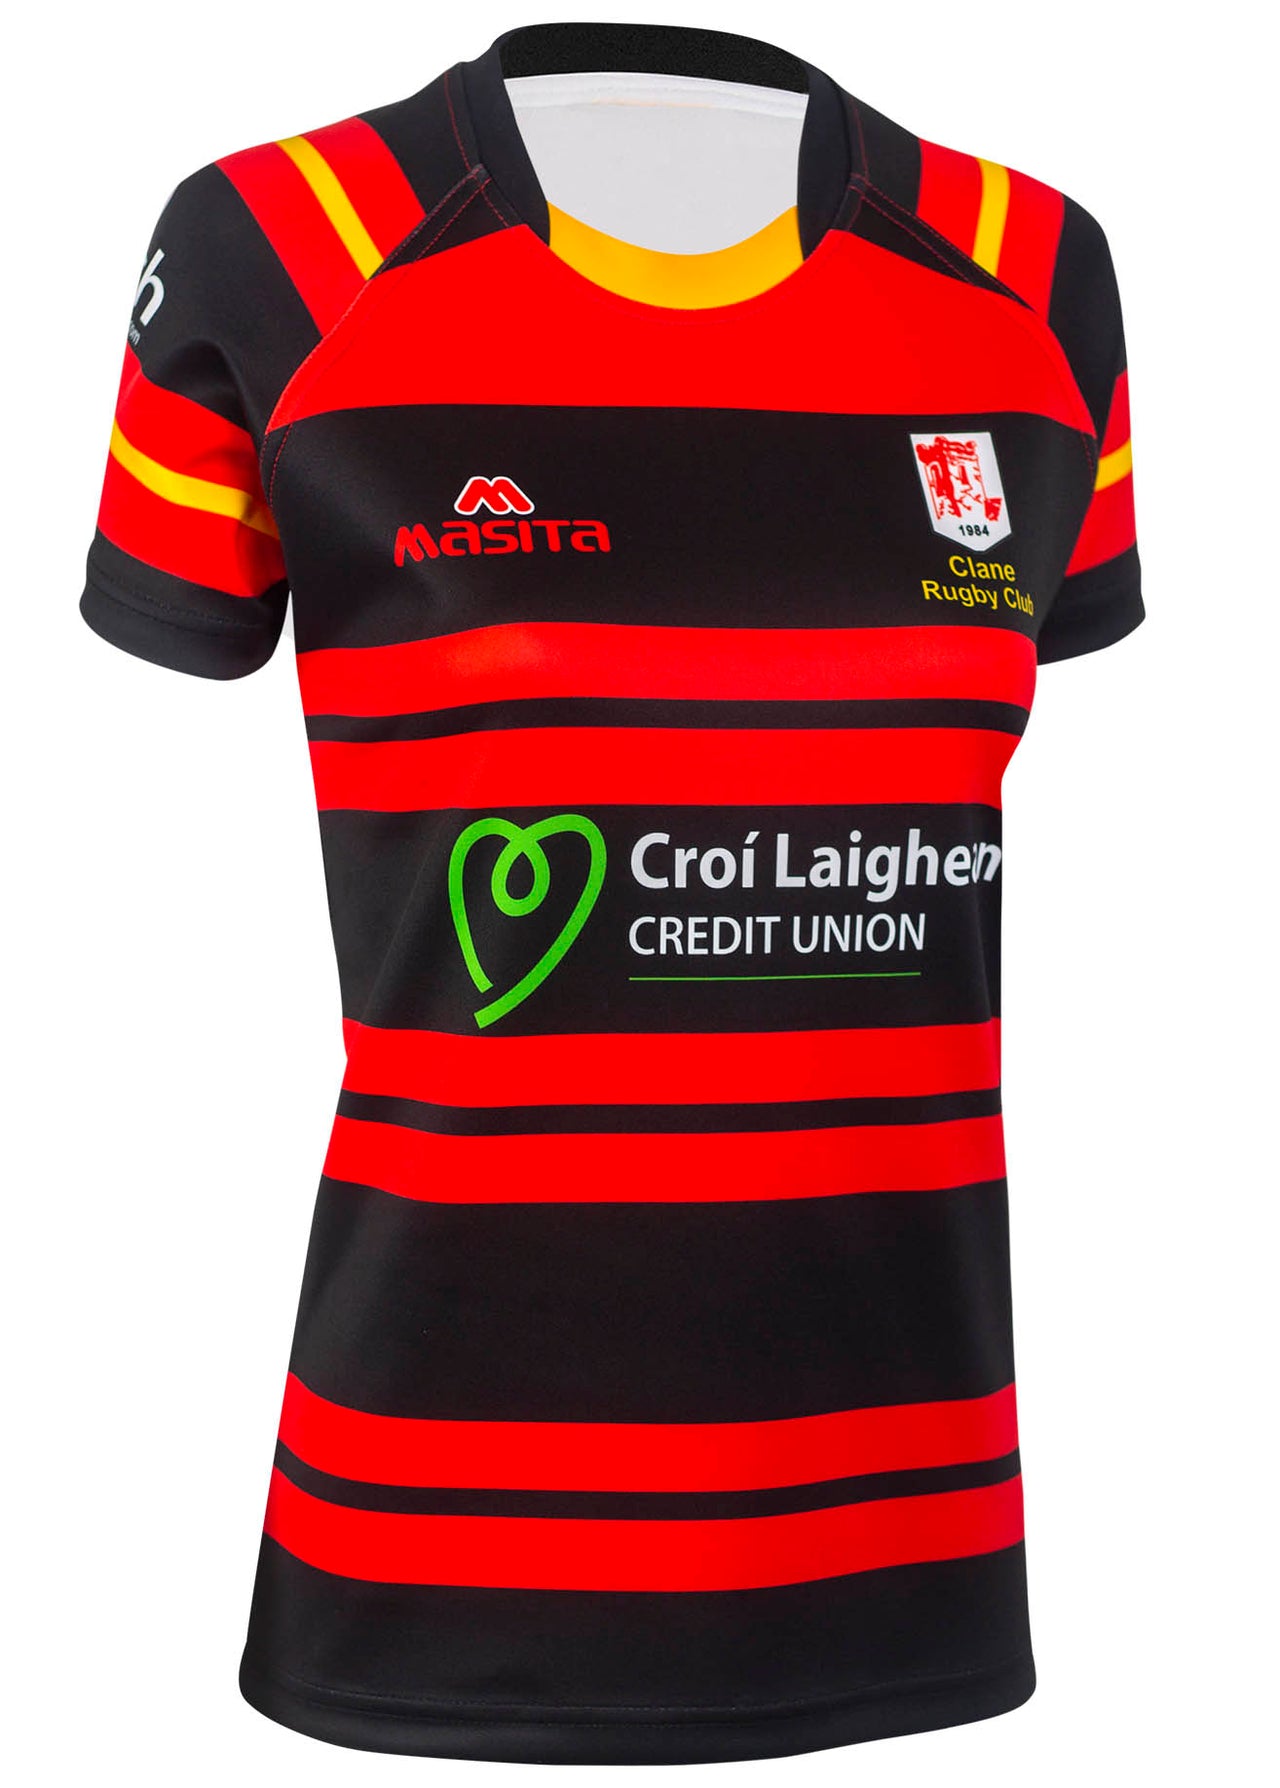 Clane Rugby Ladies Jersey Unisex Fit Adult